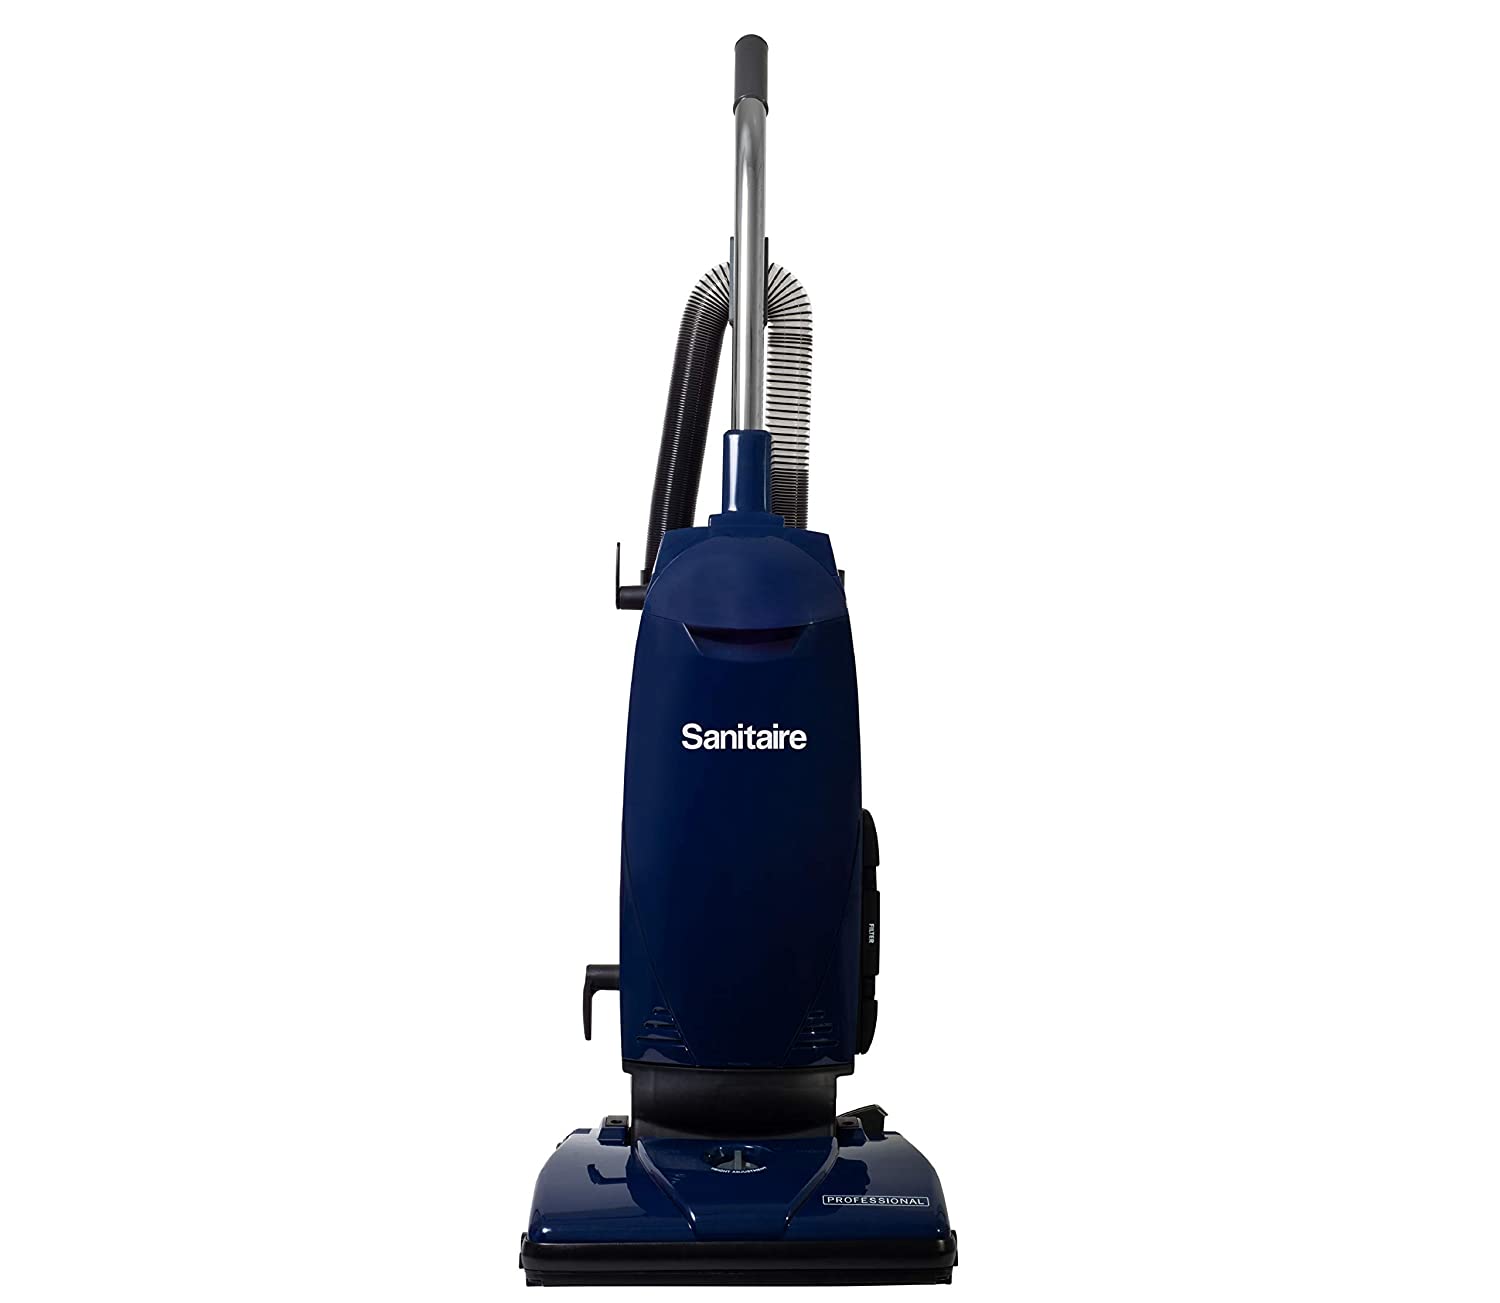 Sanitaire Professional Bagged Upright Vacuum with On-Board Tools, SL4110A - image 1 of 6